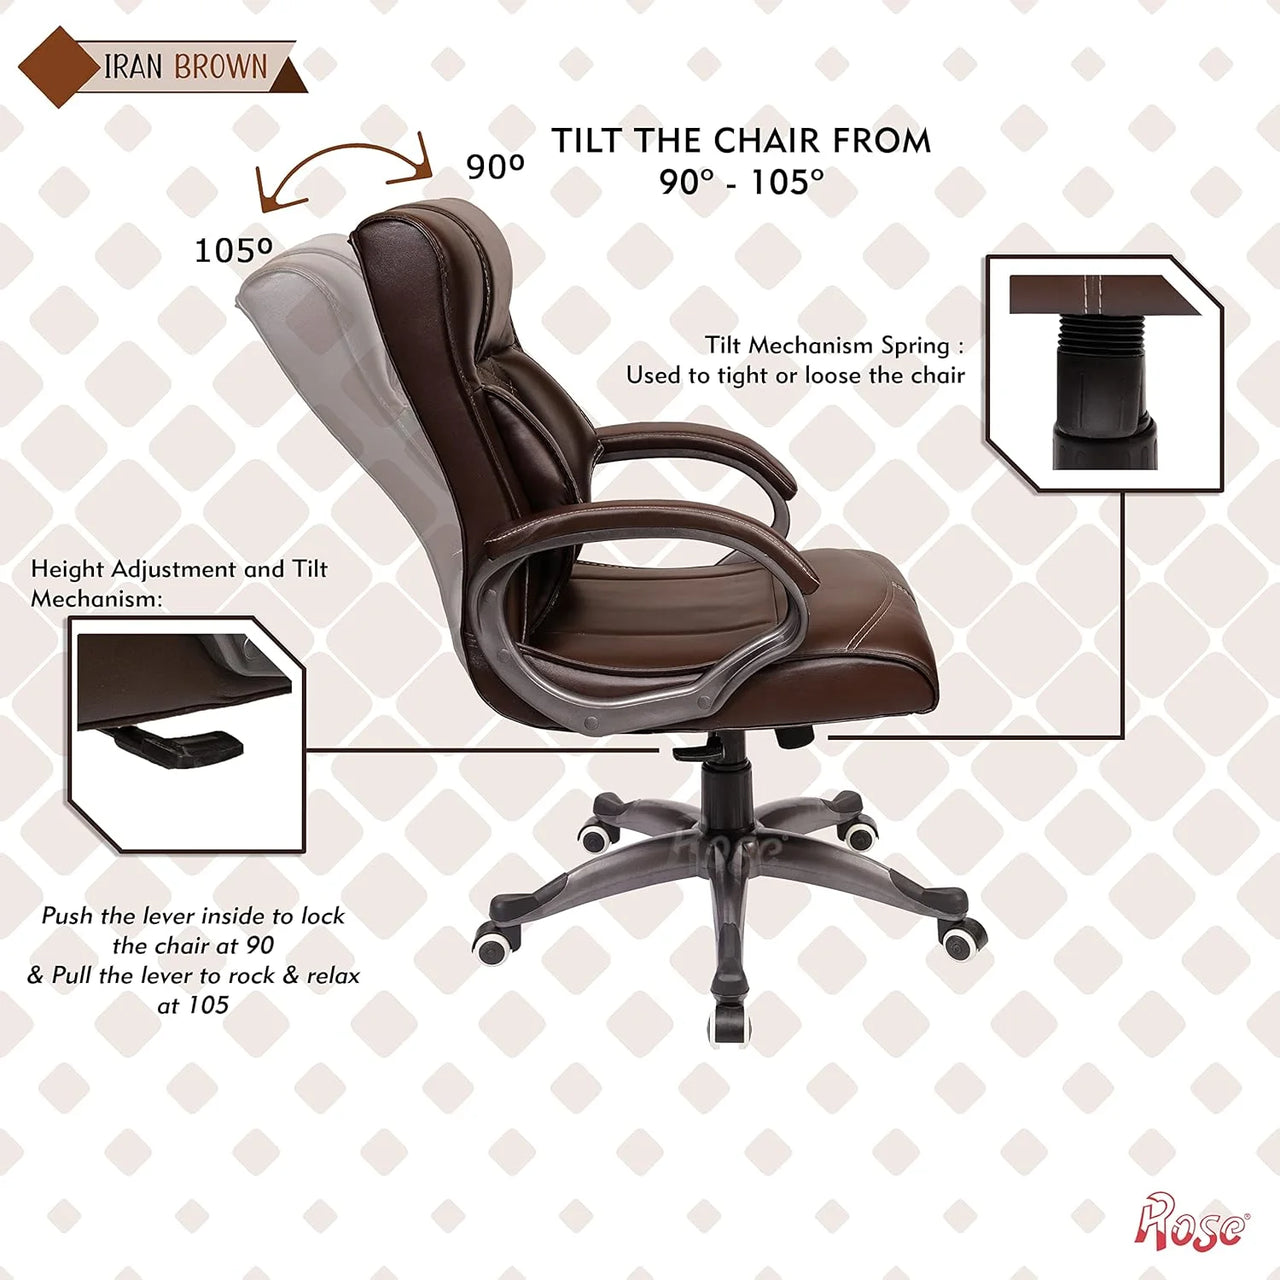 Iran Leatherette Executive Mid Back/High Back Revolving Office Chair (Brown, Mid Back)